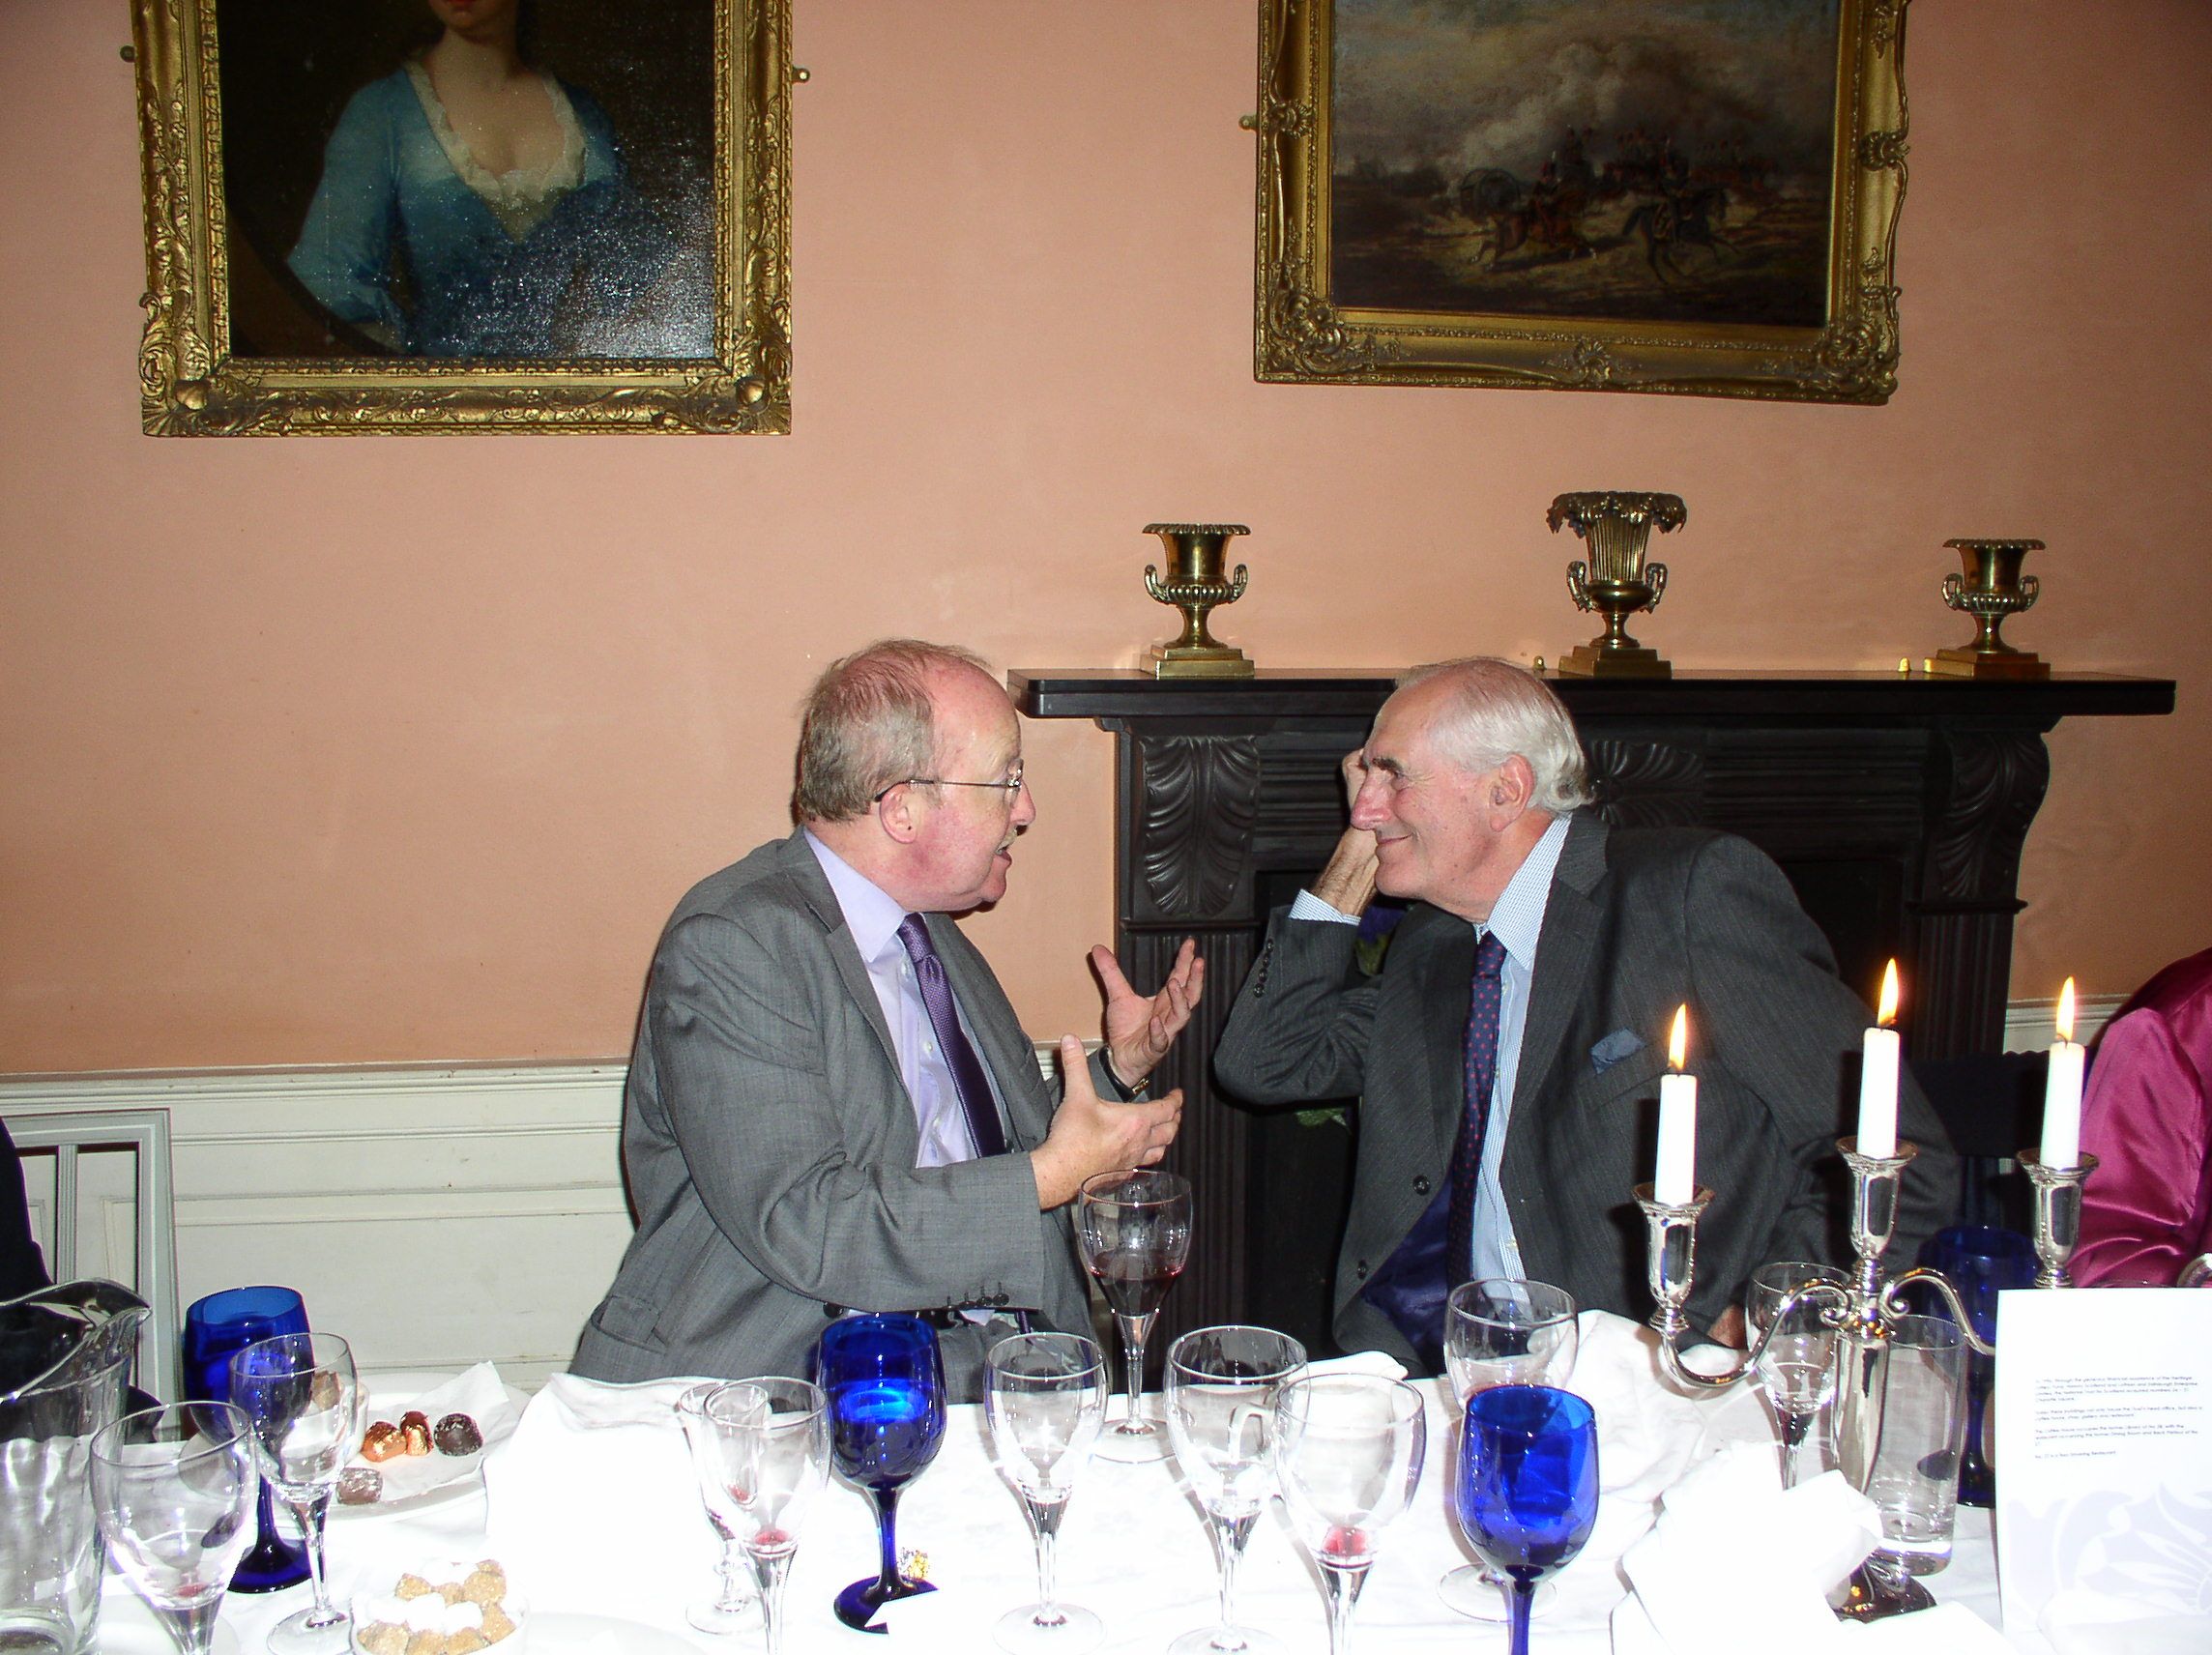 This is two honourary fellows of Scotlink in conversation